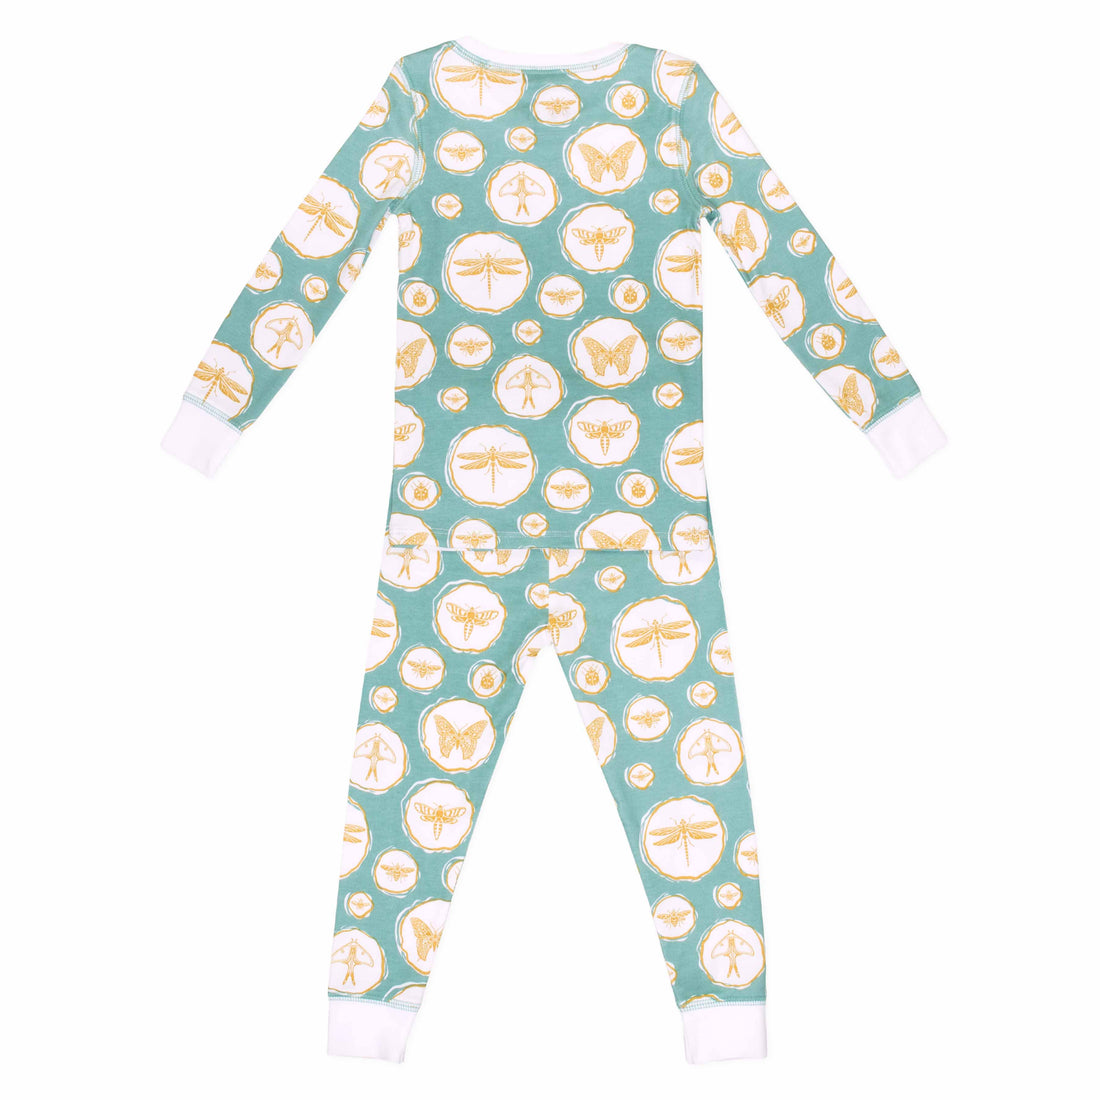 Green and gold two-piece pajama set with bug and insect pattern made with pima cotton - back view